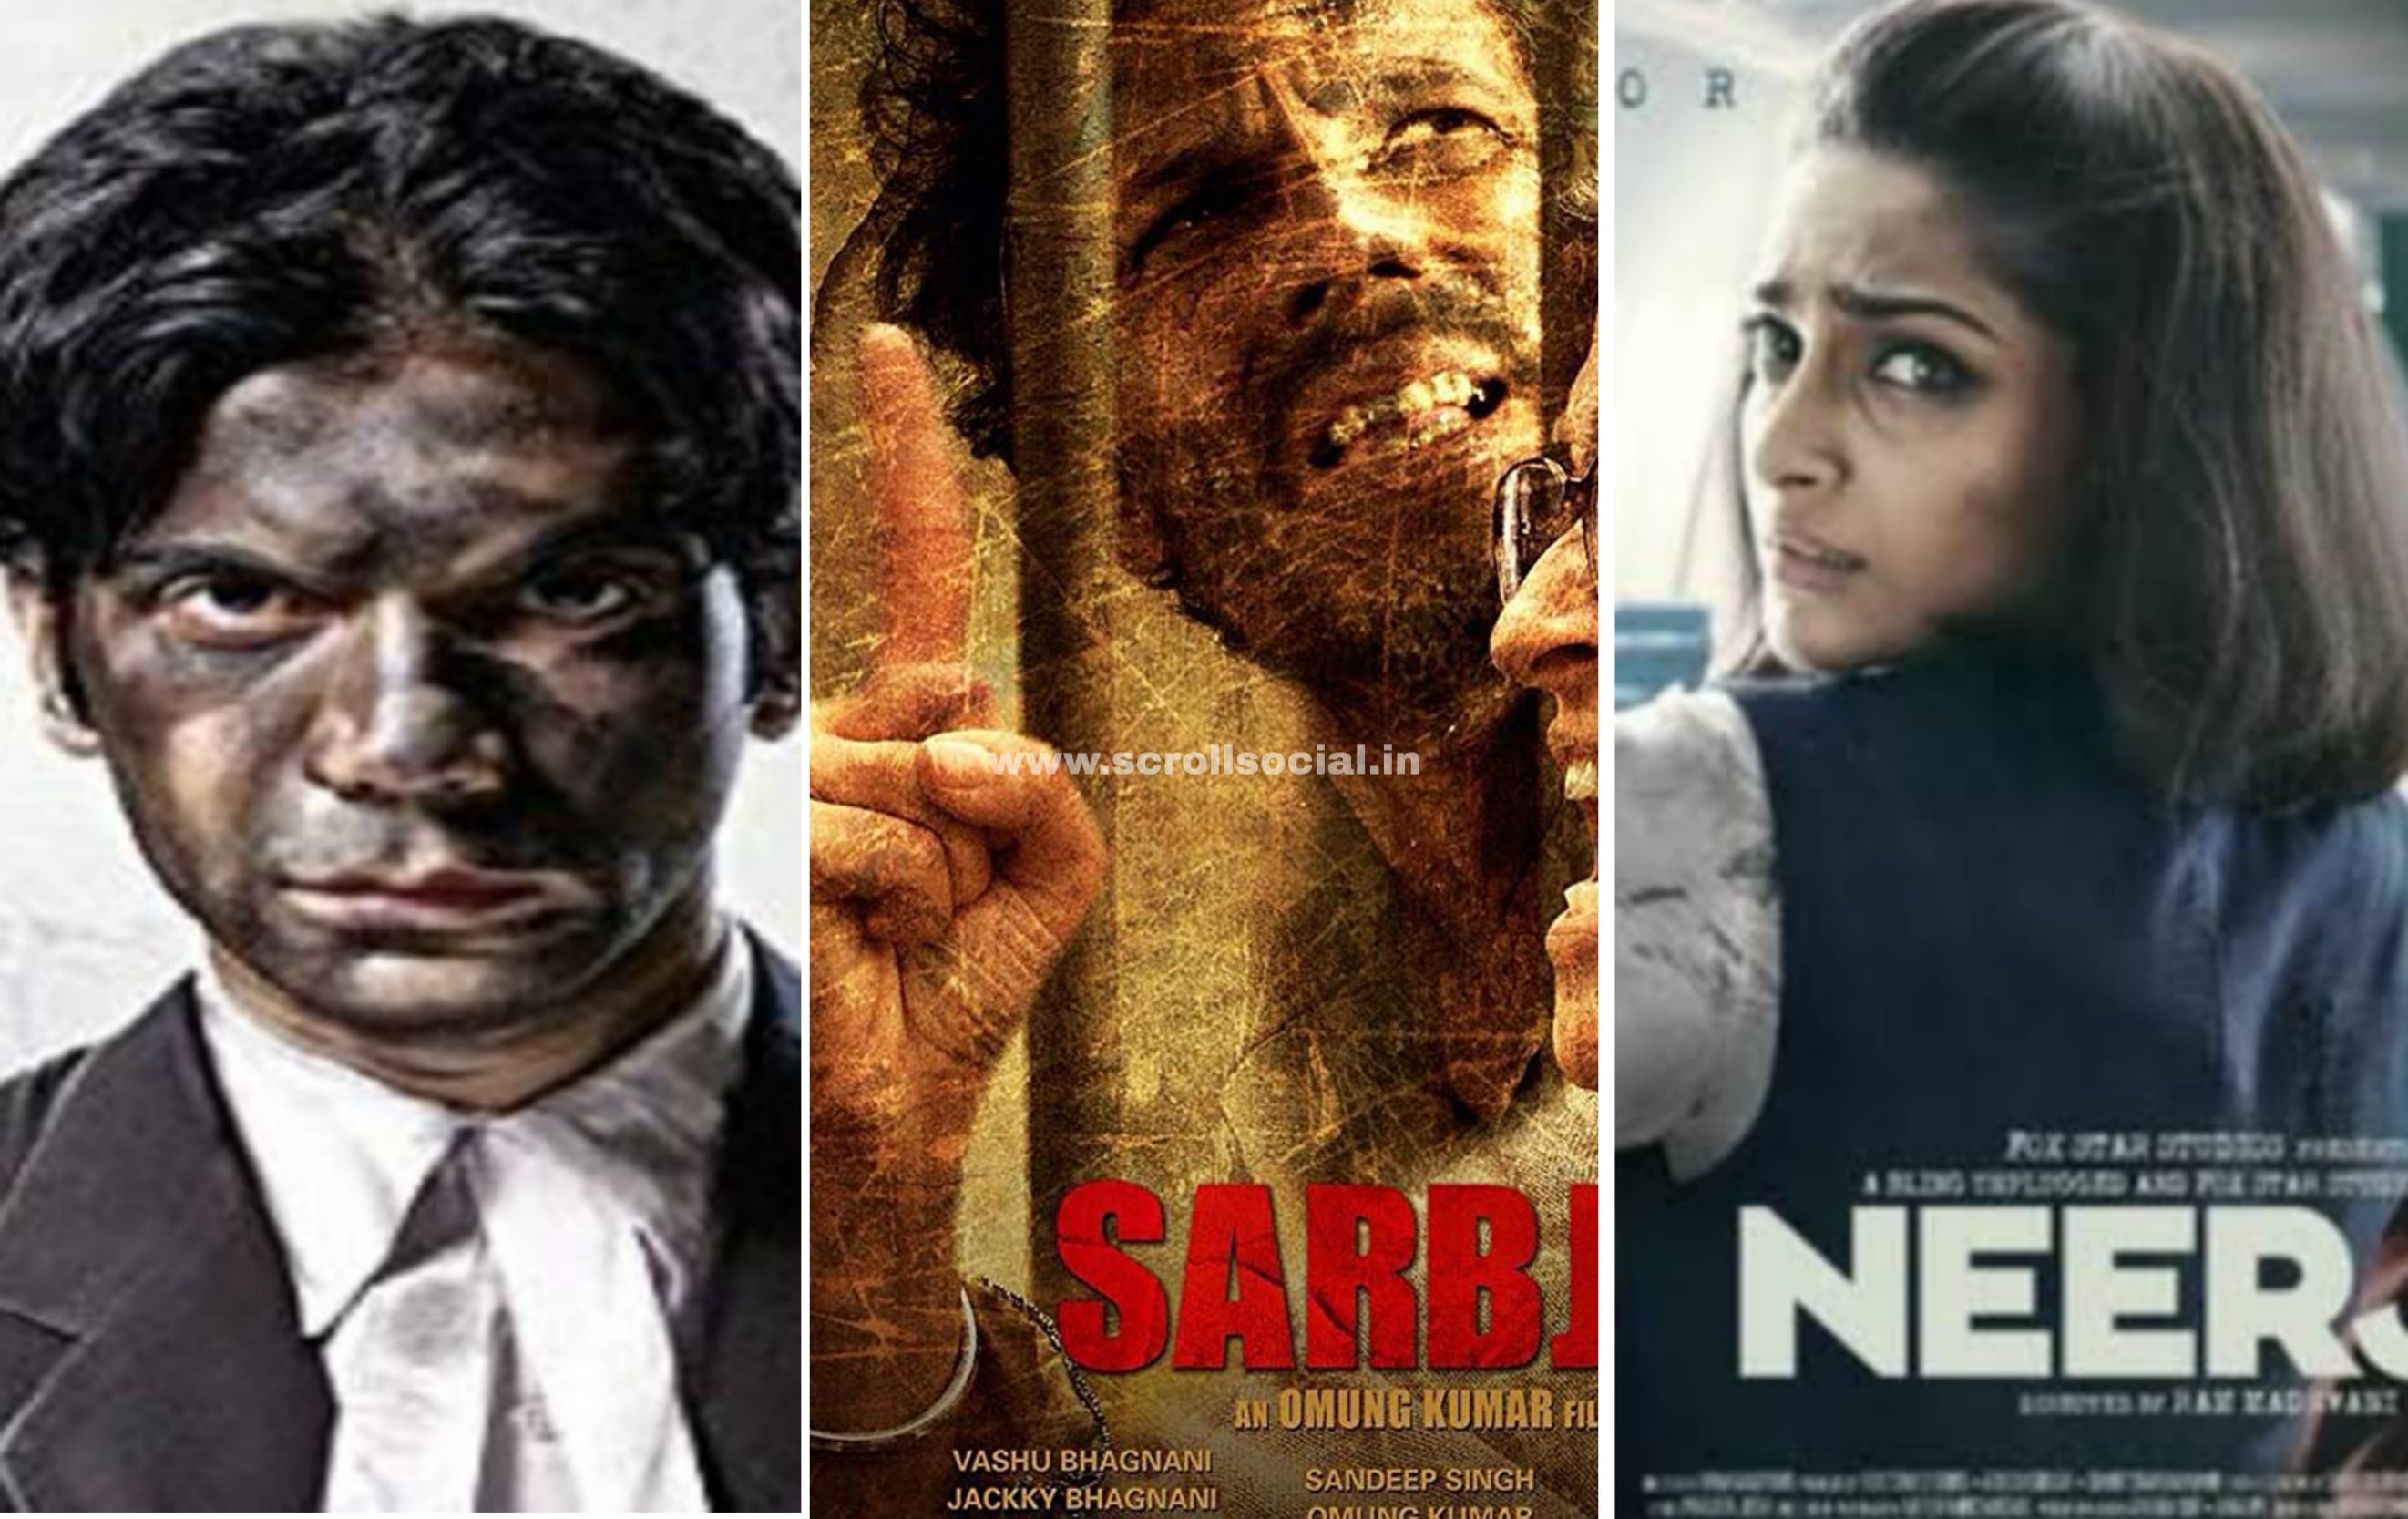 Real story movies in Bollywood which are Crime and thriller stories